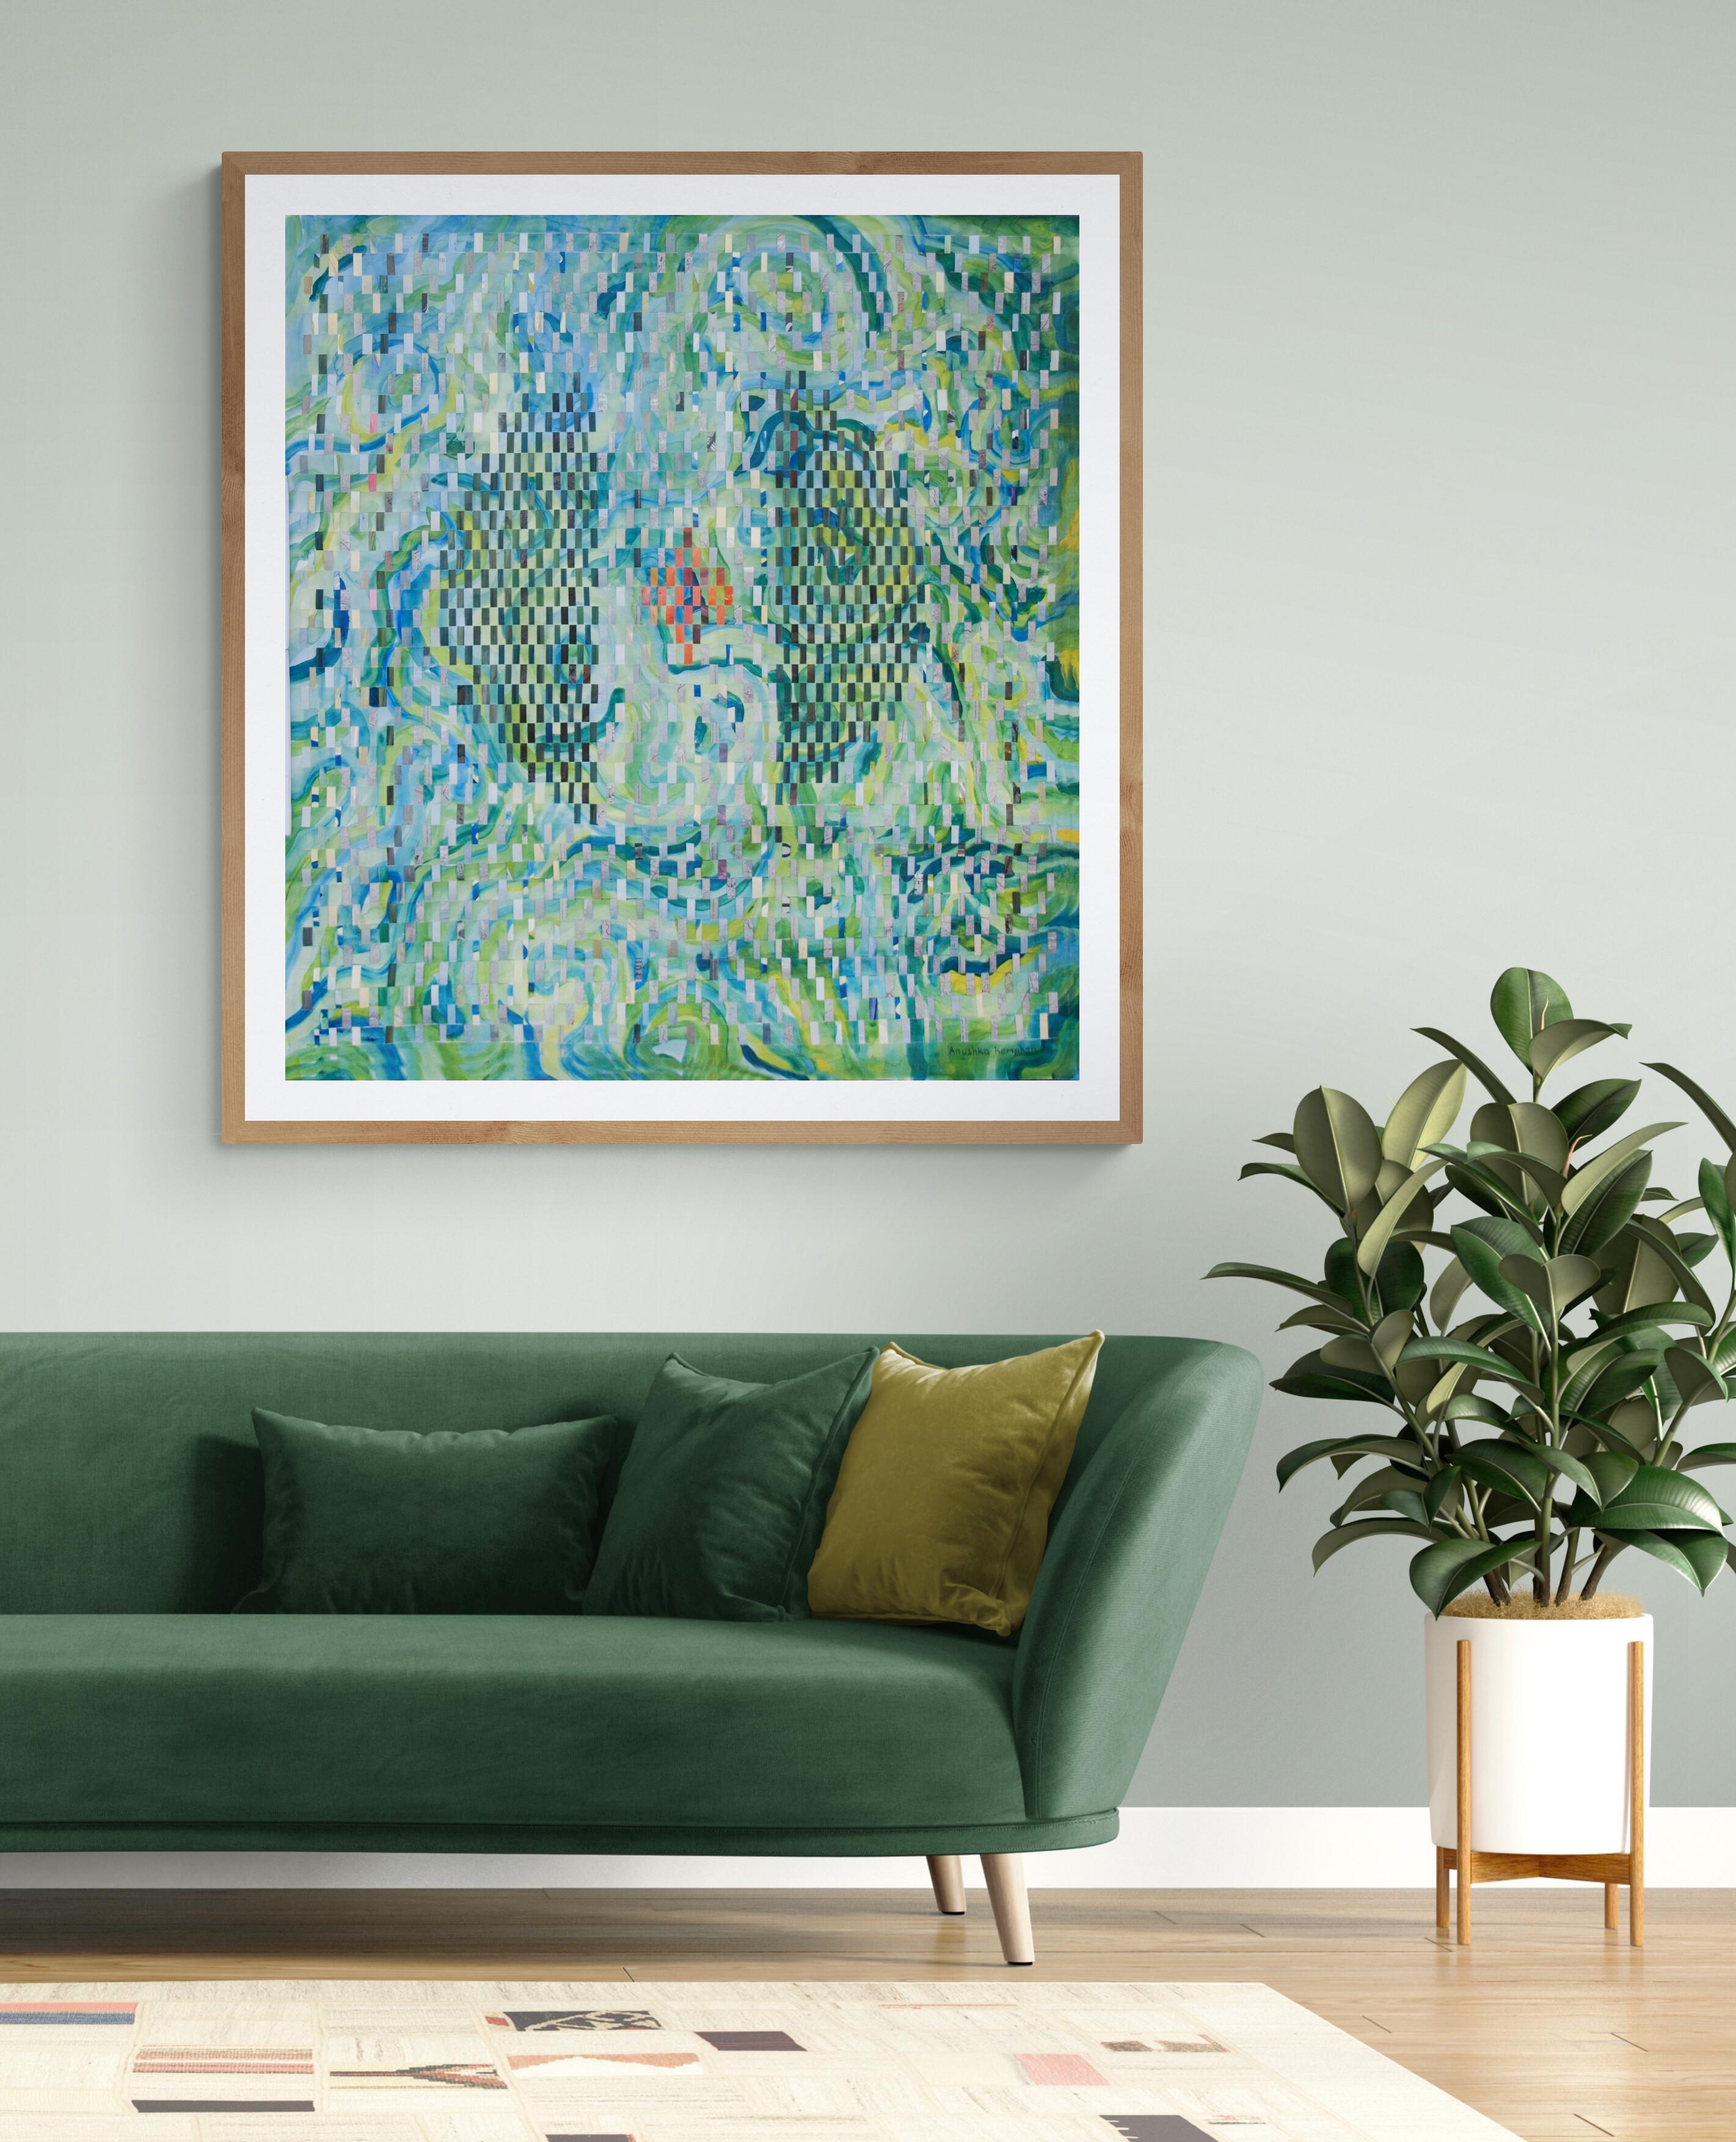 This unique artwork is created through interweaving strips of painted fabriano paper in order to create a complex composition with depth and texture. The artwork is framed and floated to the backboard. The dimensions of 110 x 100 cm are that of the